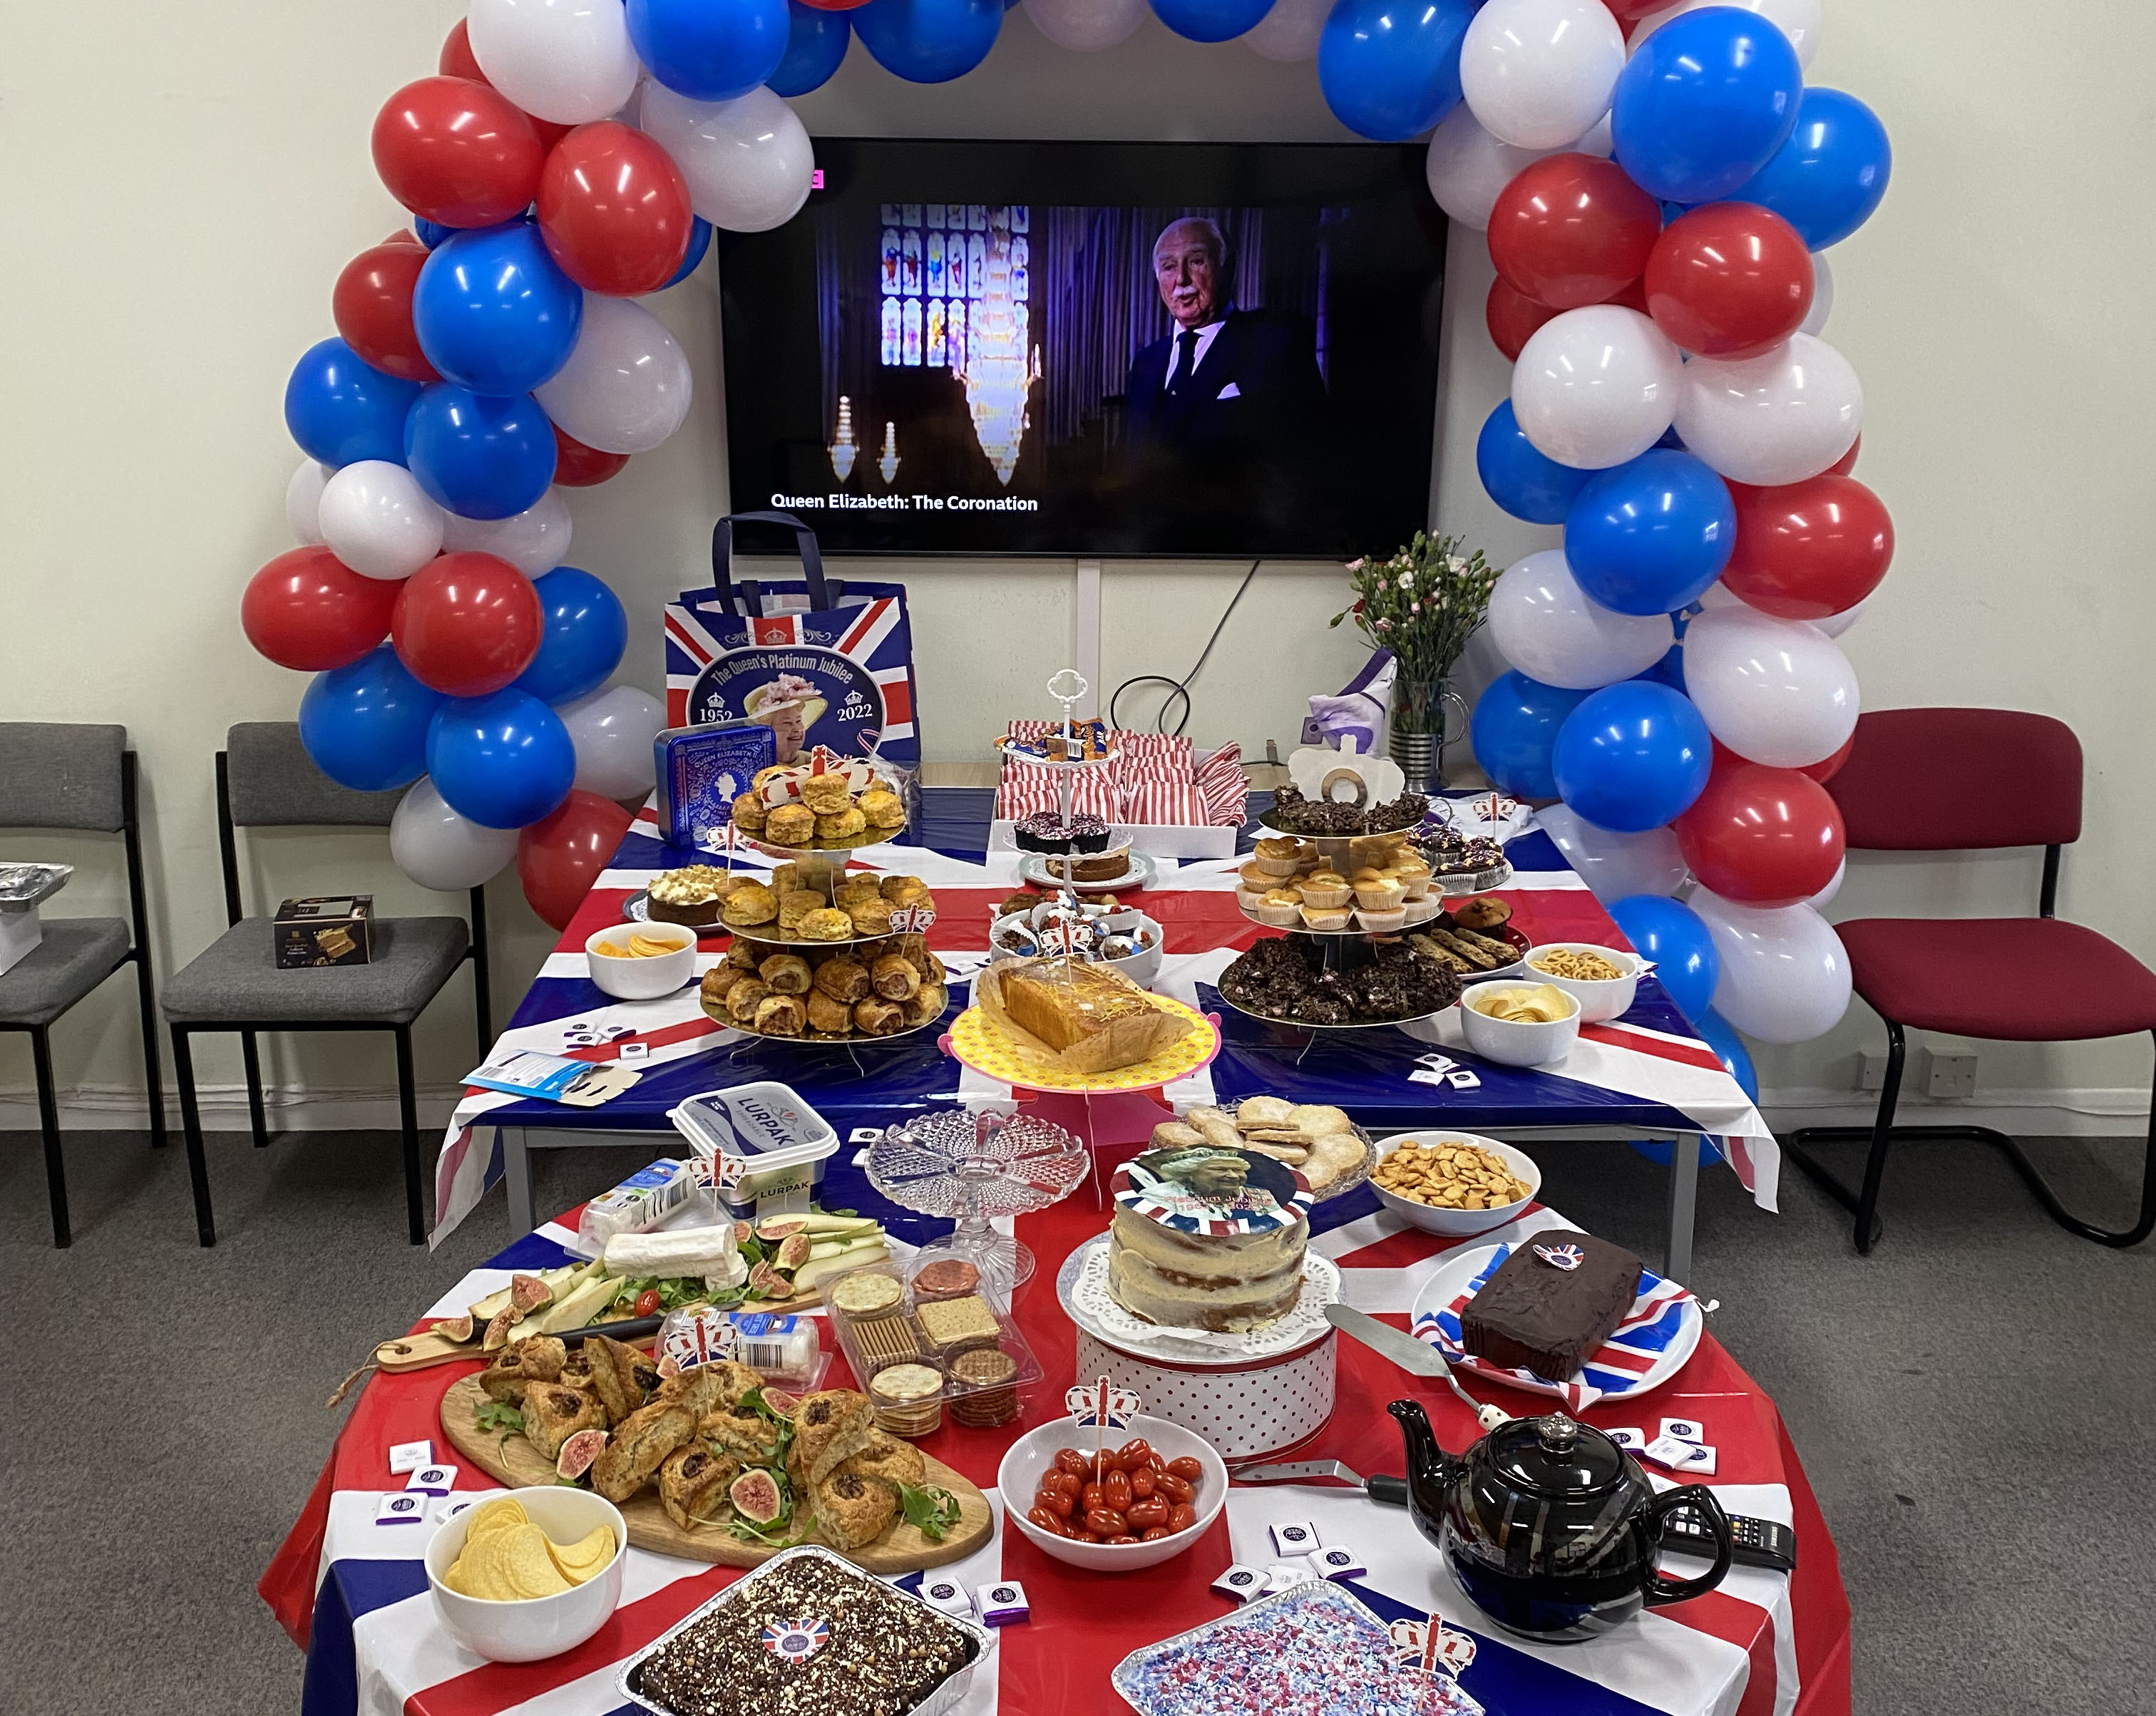 On Wednesday 1sy June, we had a Jubilee themed bake sale in aid of our chosen charity, The Larwood School.